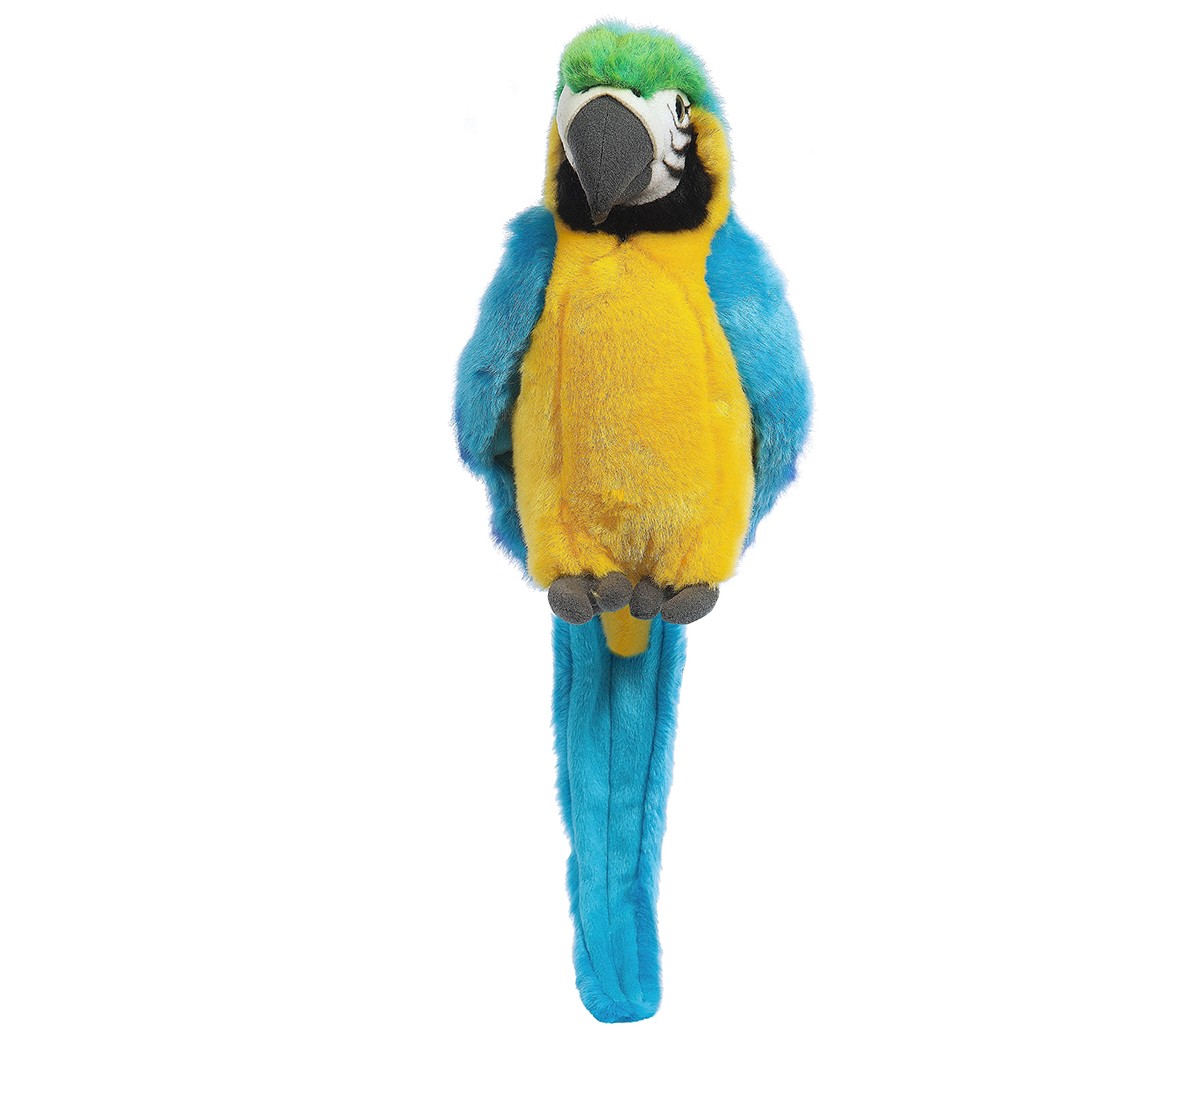  Hamleys Pepper Blue Parrot Soft Toy, Multi Color (5-Inch) Animals & Birds for Kids age 3Y+ - 12 Cm 